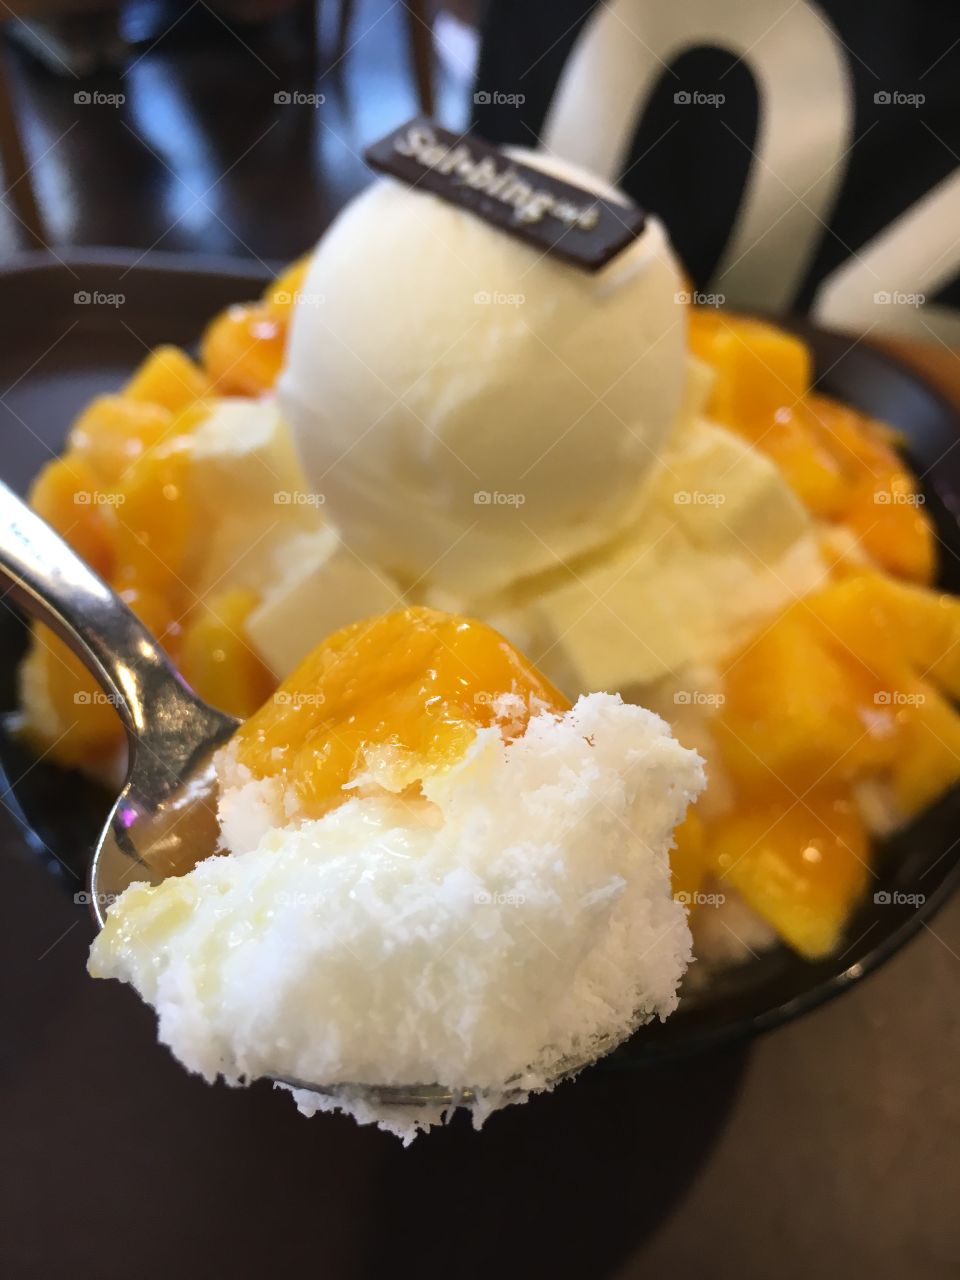 If you’re in Seoul, this is one of the must haves. Especially on a hot summer day. Shaved Ice or Bingsu as they call it, it’s like fluff that melts in your mouth. 